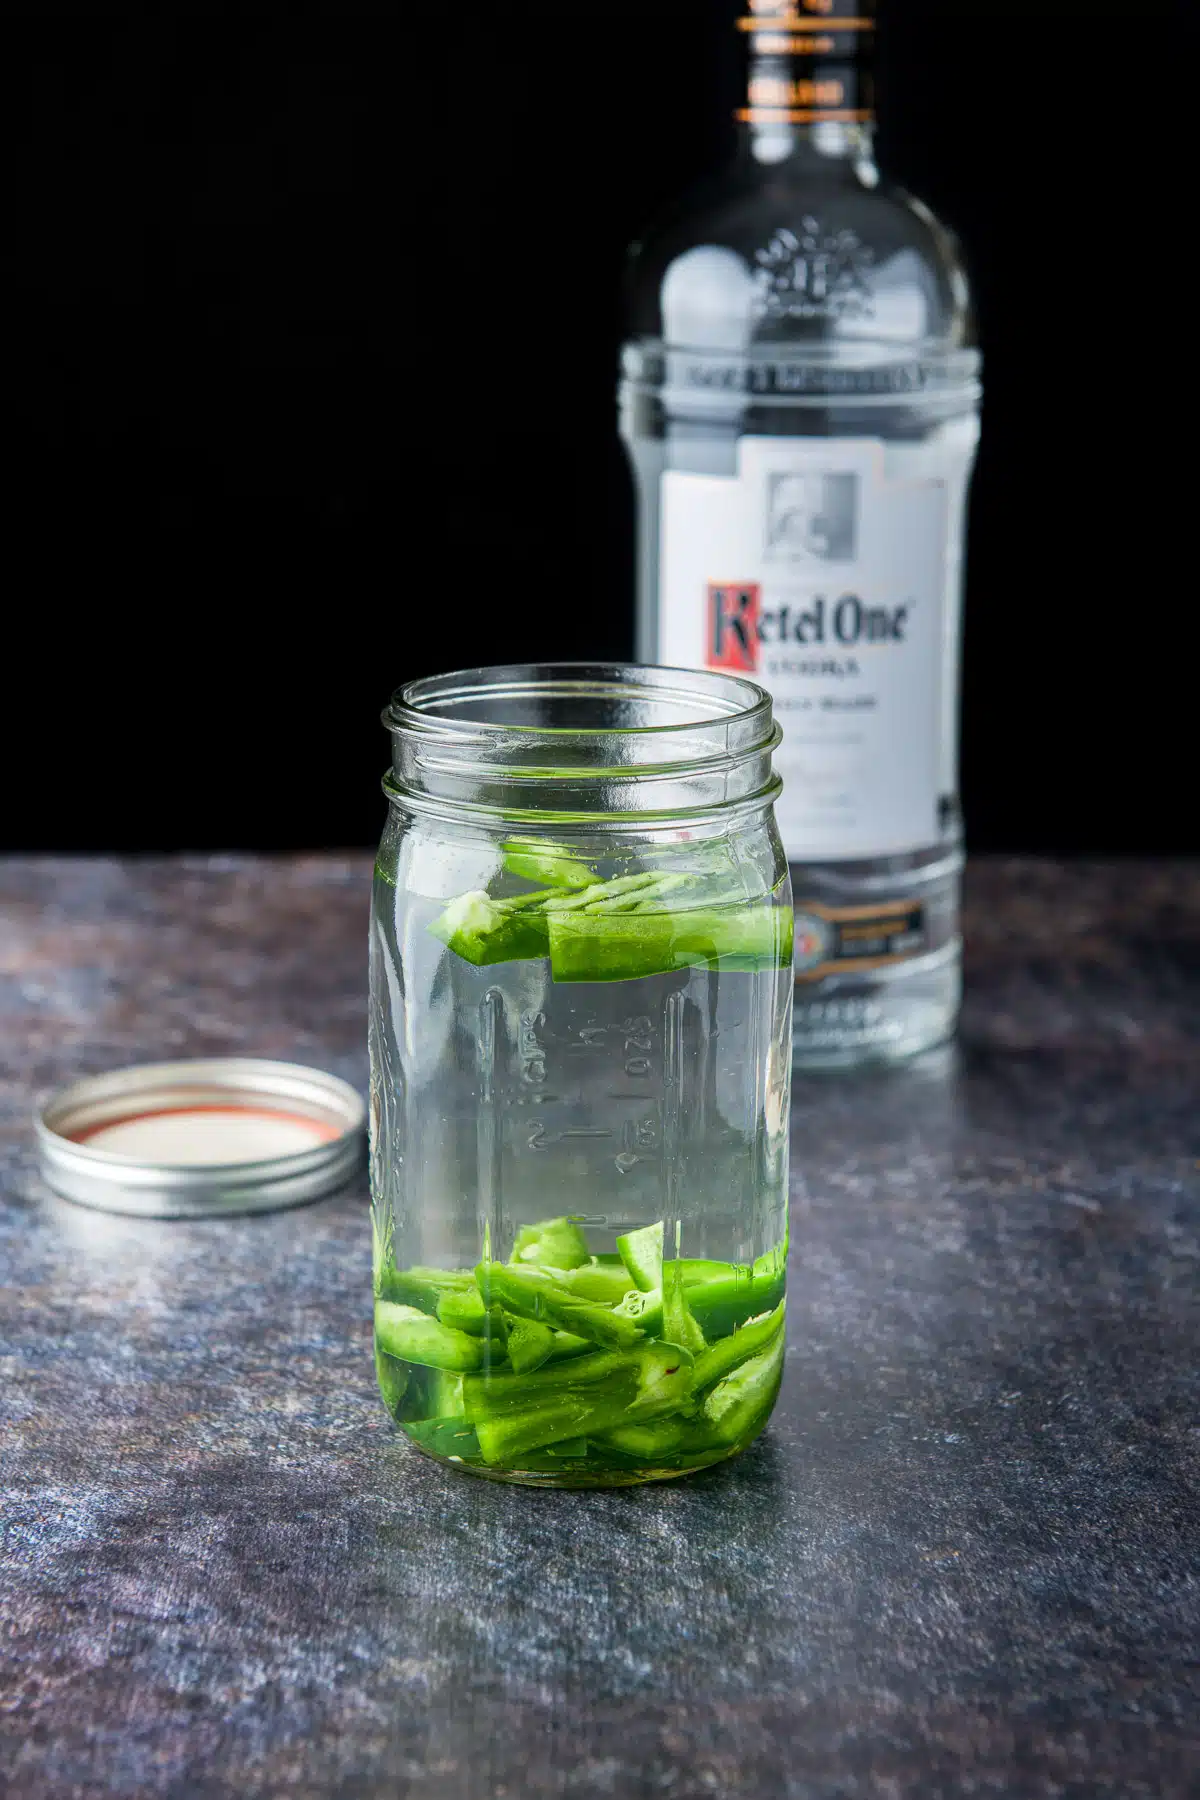 Vodka added to the jalapenos in the jar with the bottle of vodka in the background